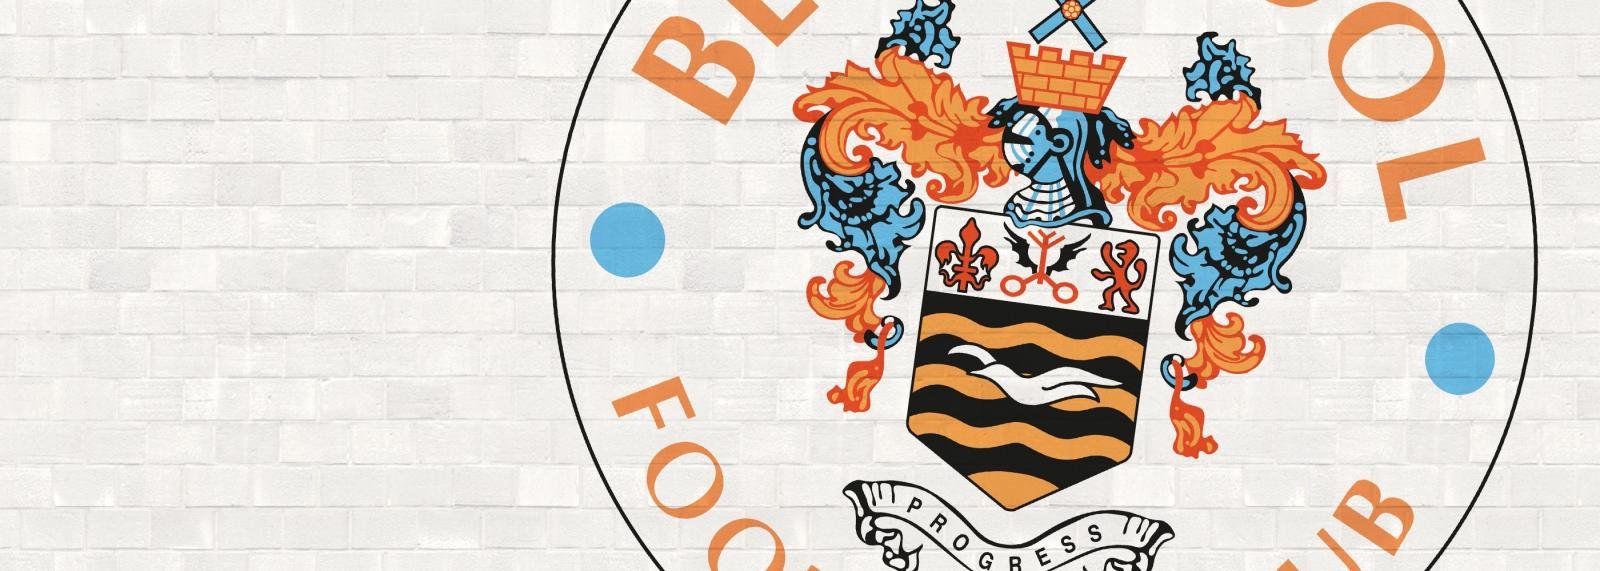 One away win changes nothing at Blackpool